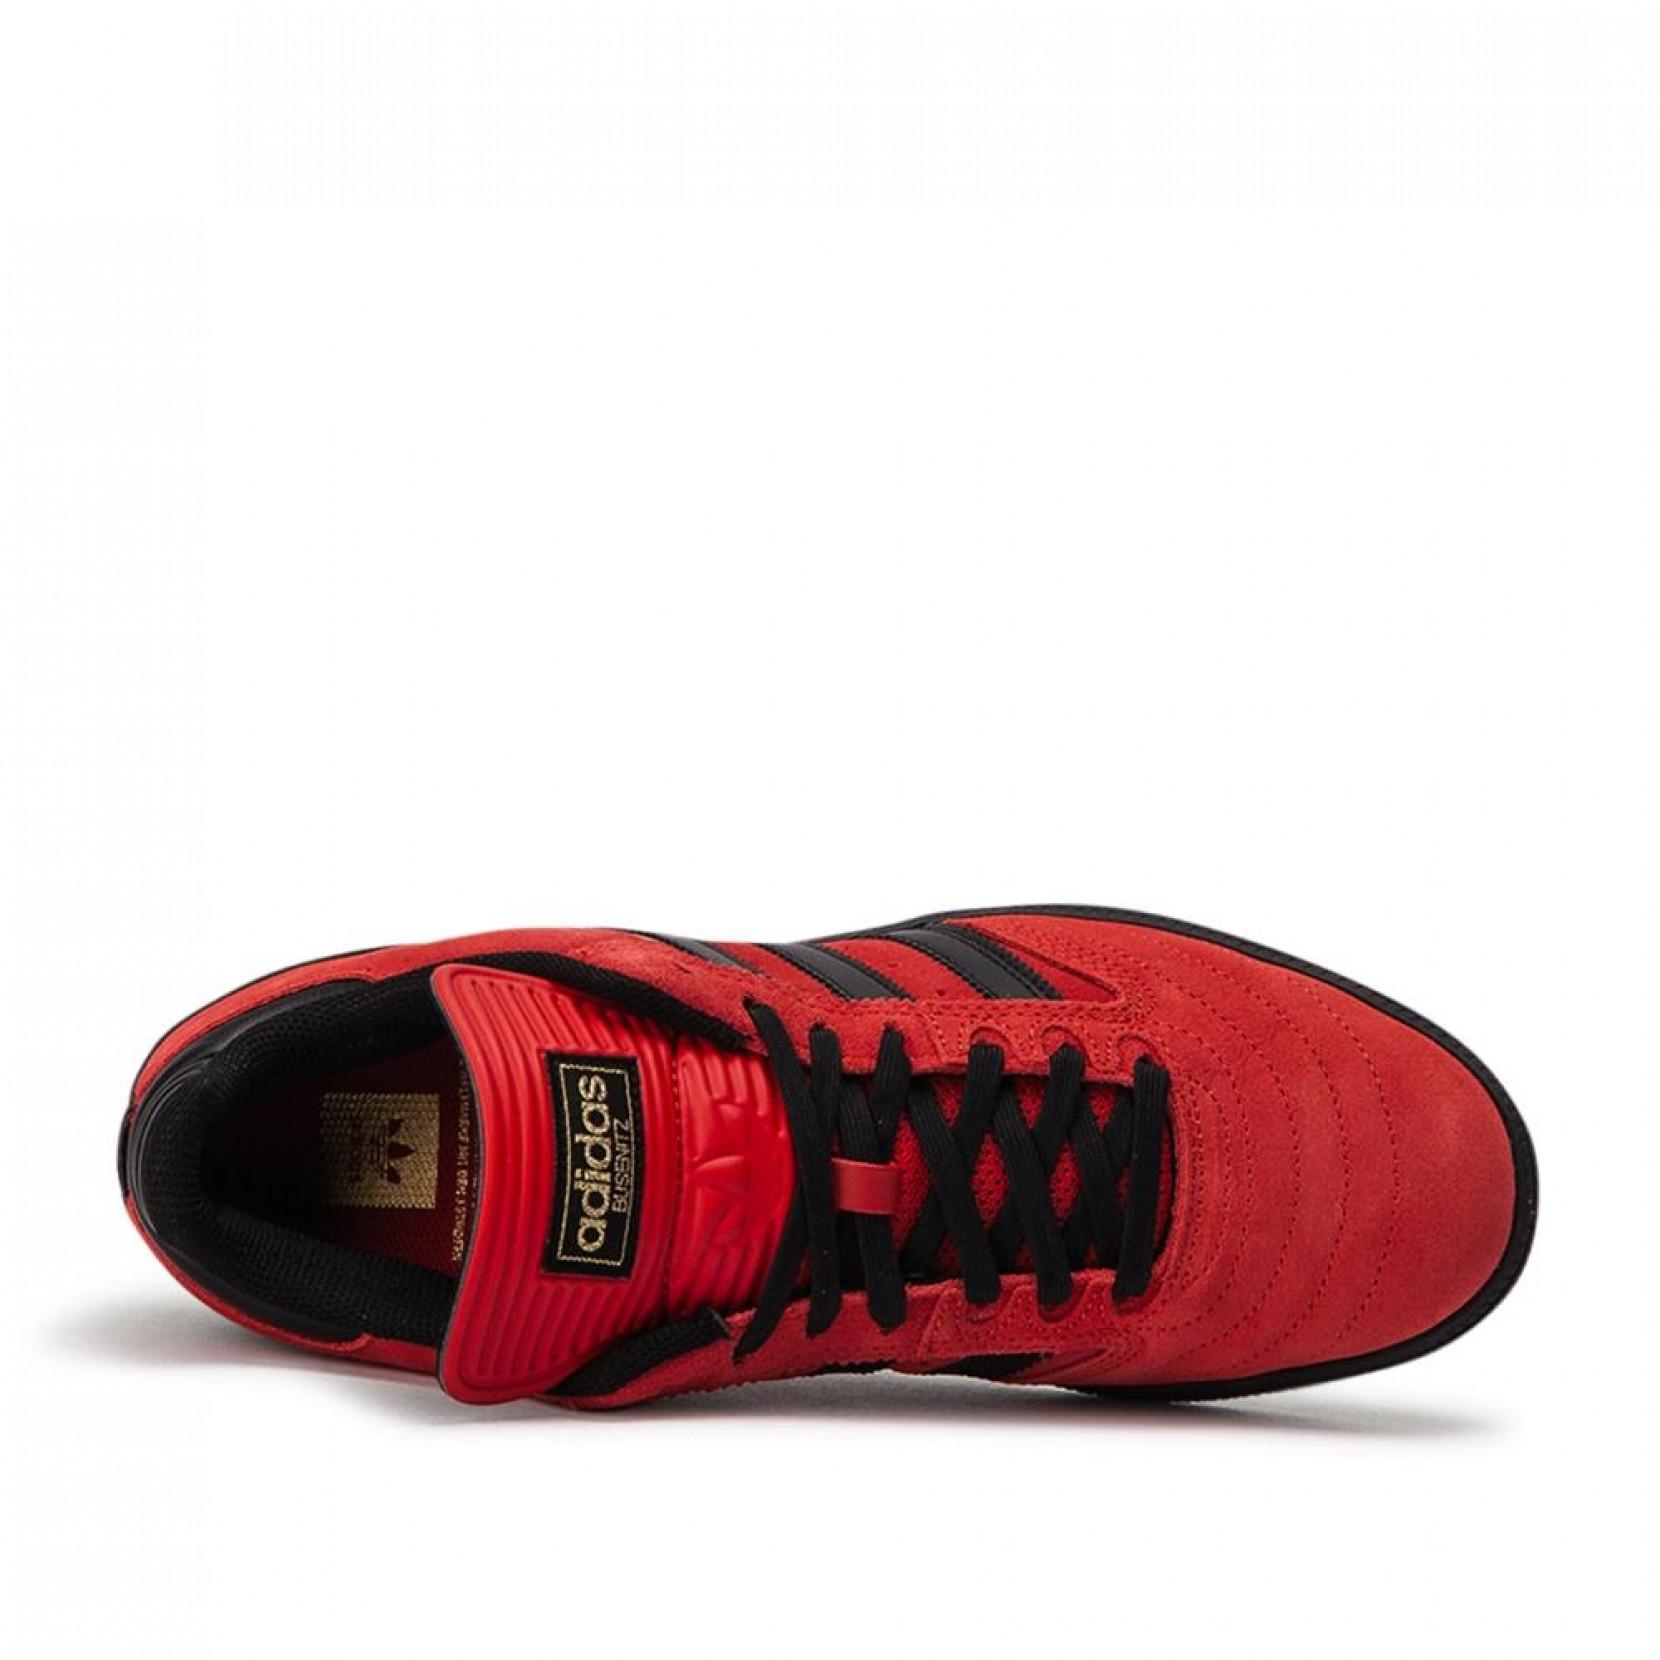 adidas Originals Leather Adidas Busenitz in Red for Men - Lyst